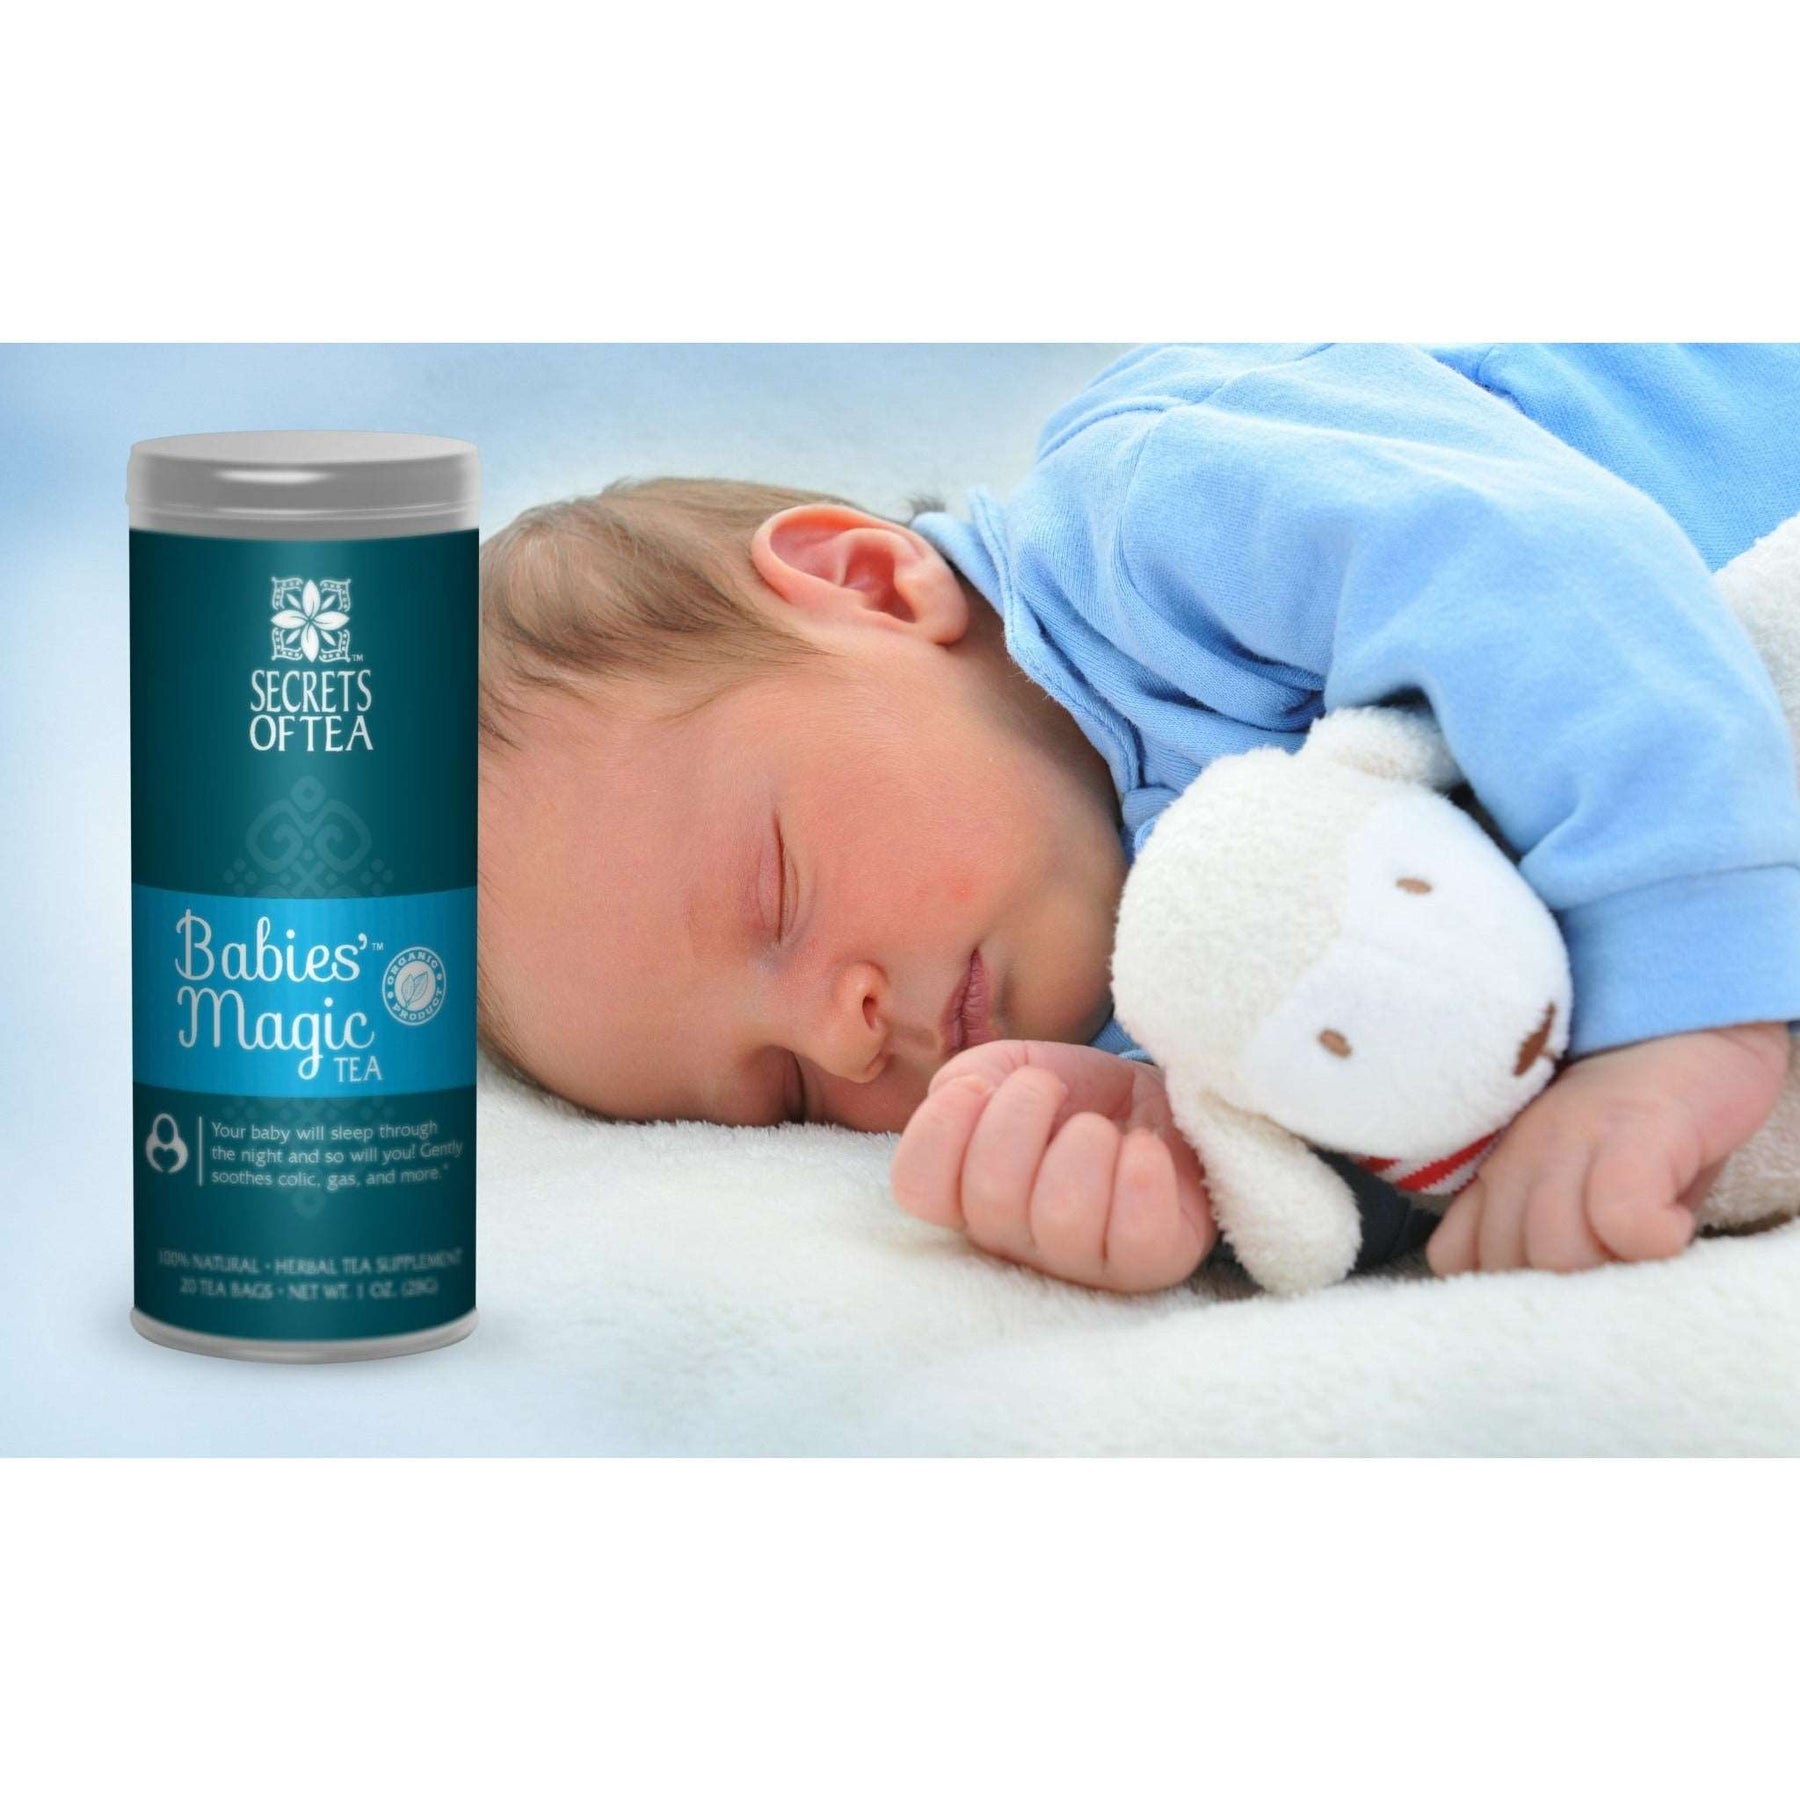 2 x Blevit Sueno Tea for Sleep Disorders for Babies and Children